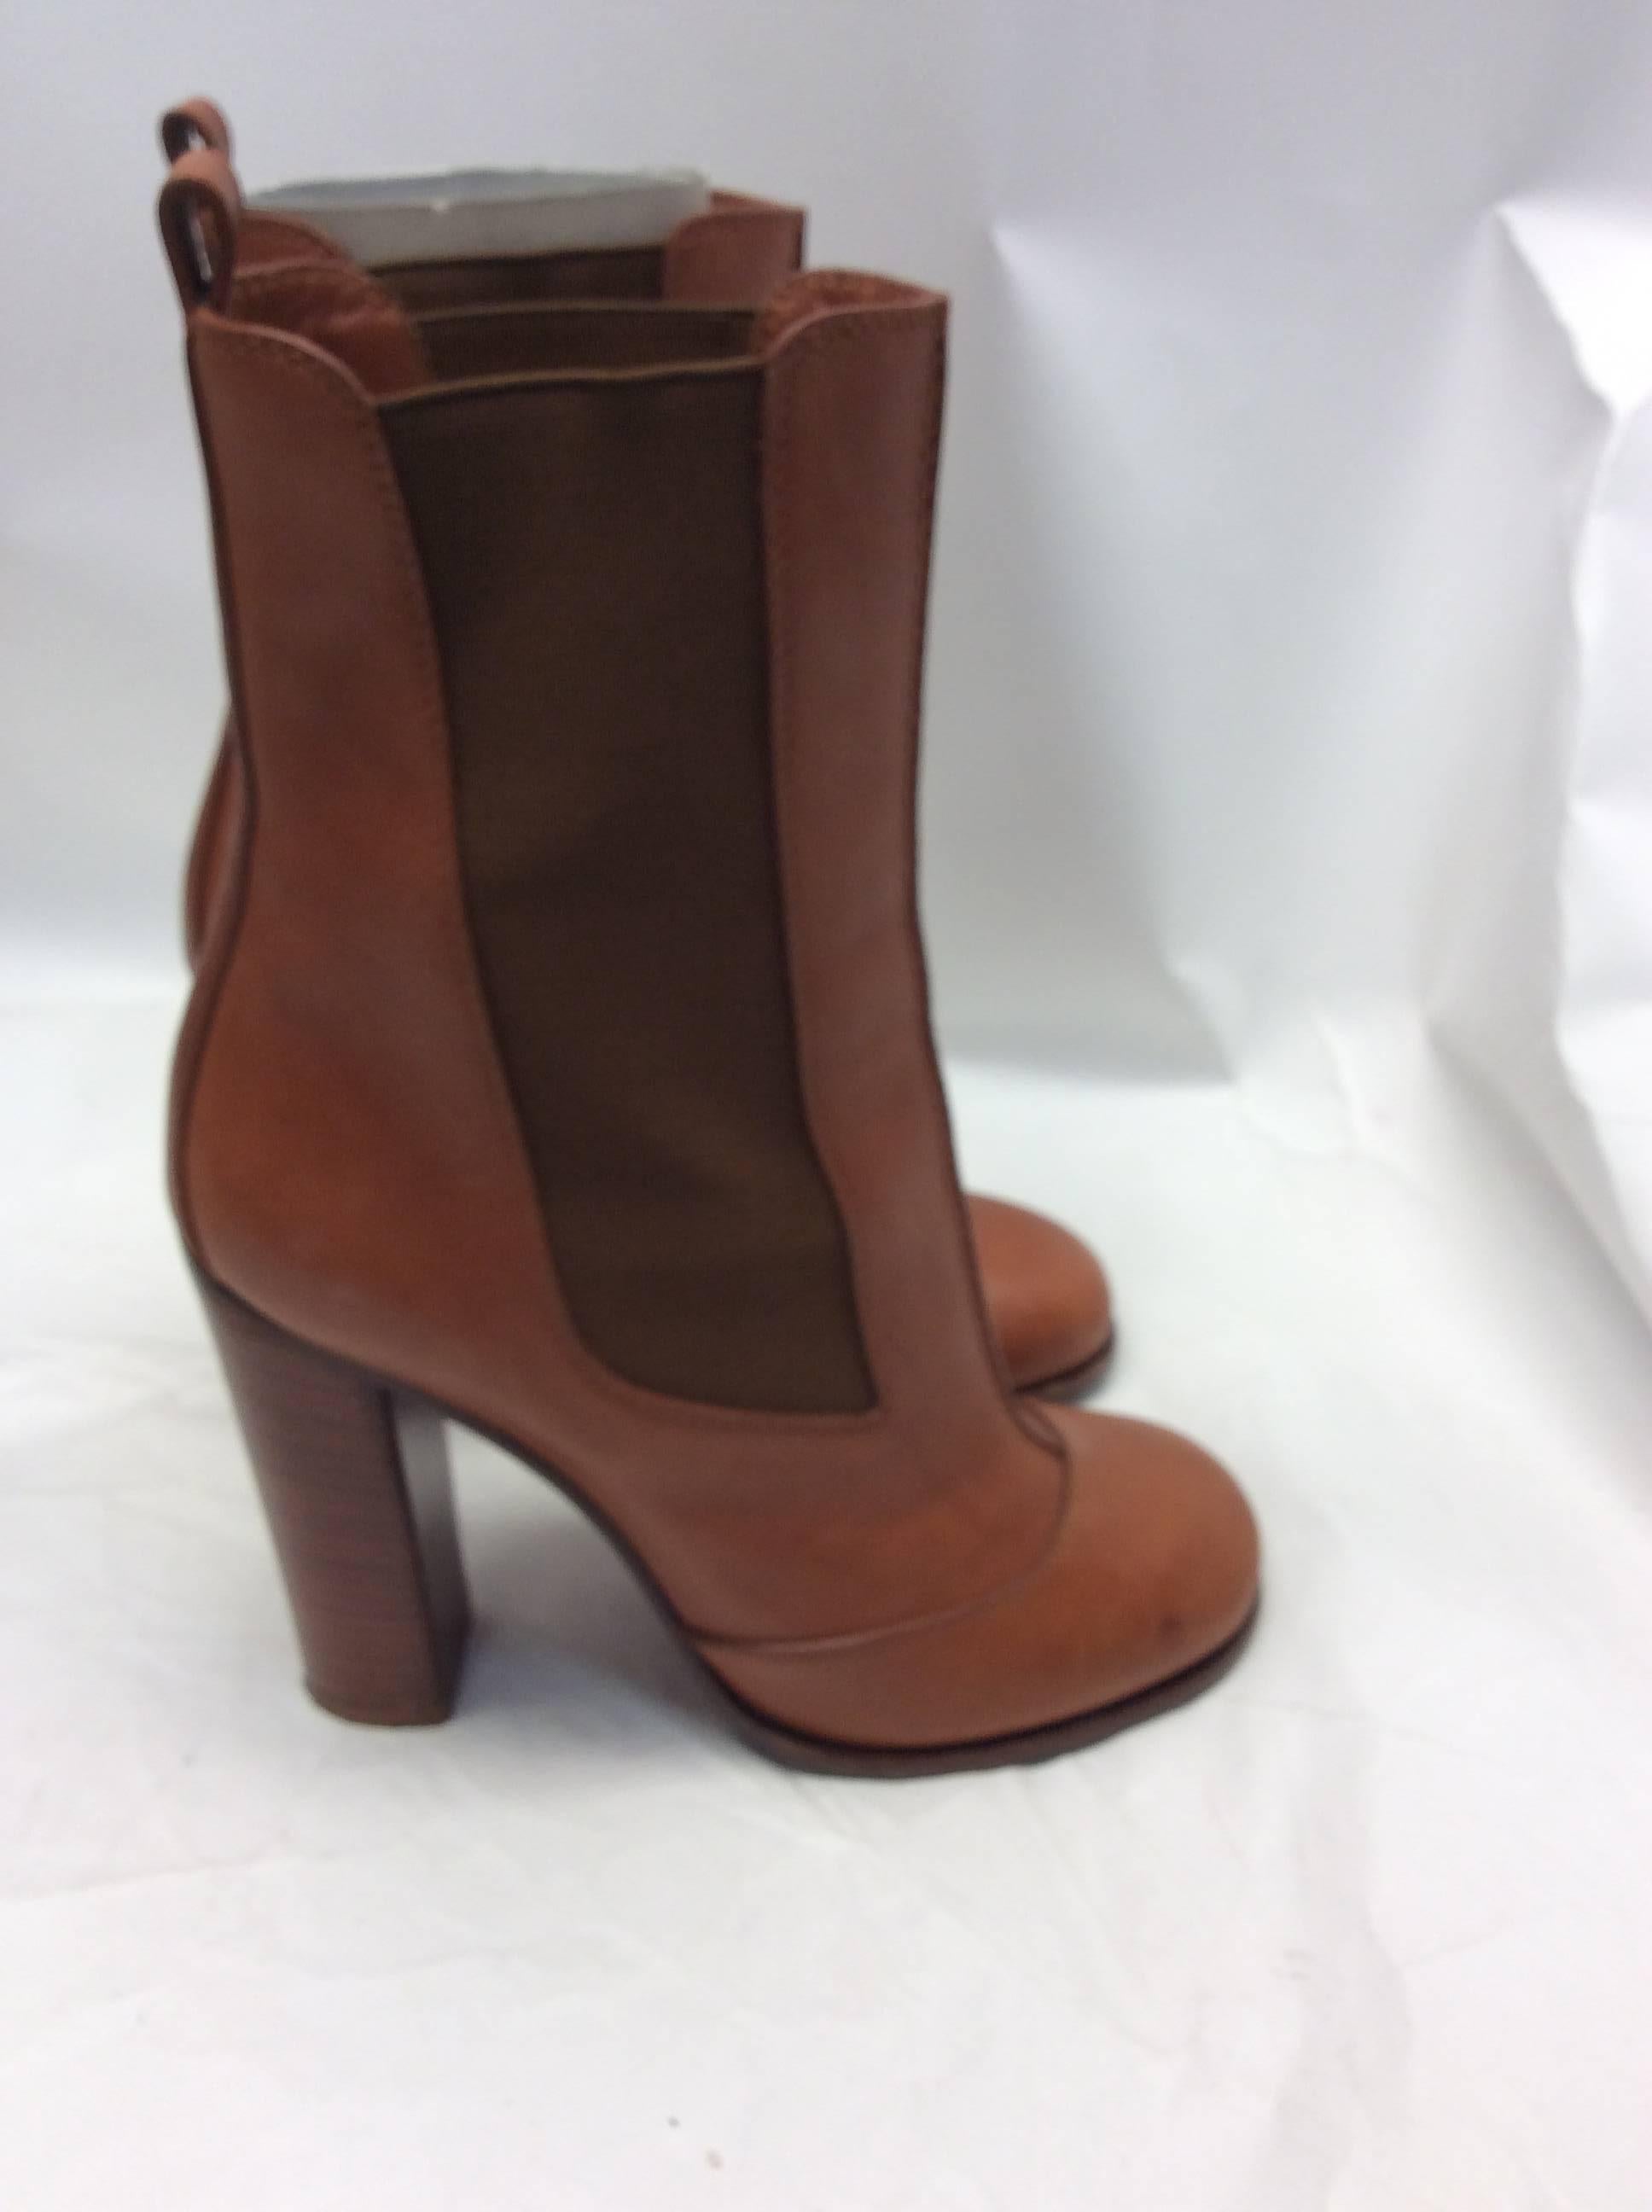 Celine Brown Leather Ankle Boots In Good Condition For Sale In Narberth, PA